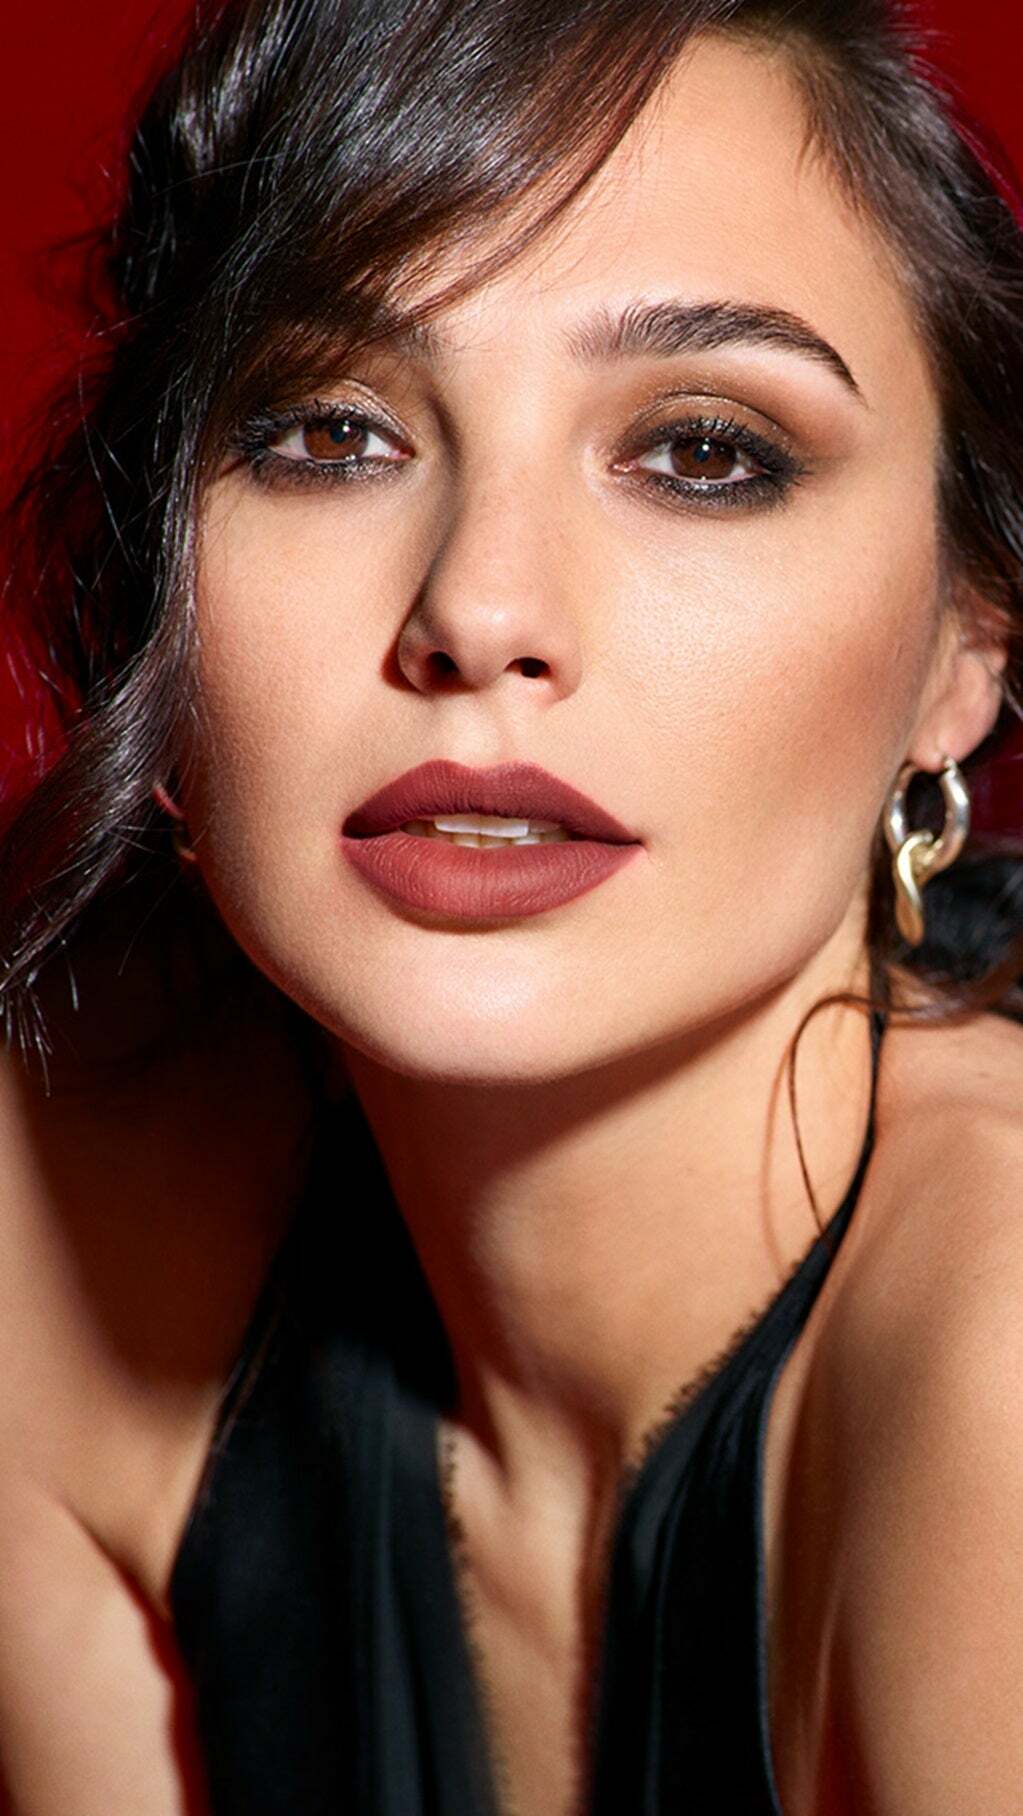 I want Gal Gadot to wrap her tight pussy around my hard cock and ride me